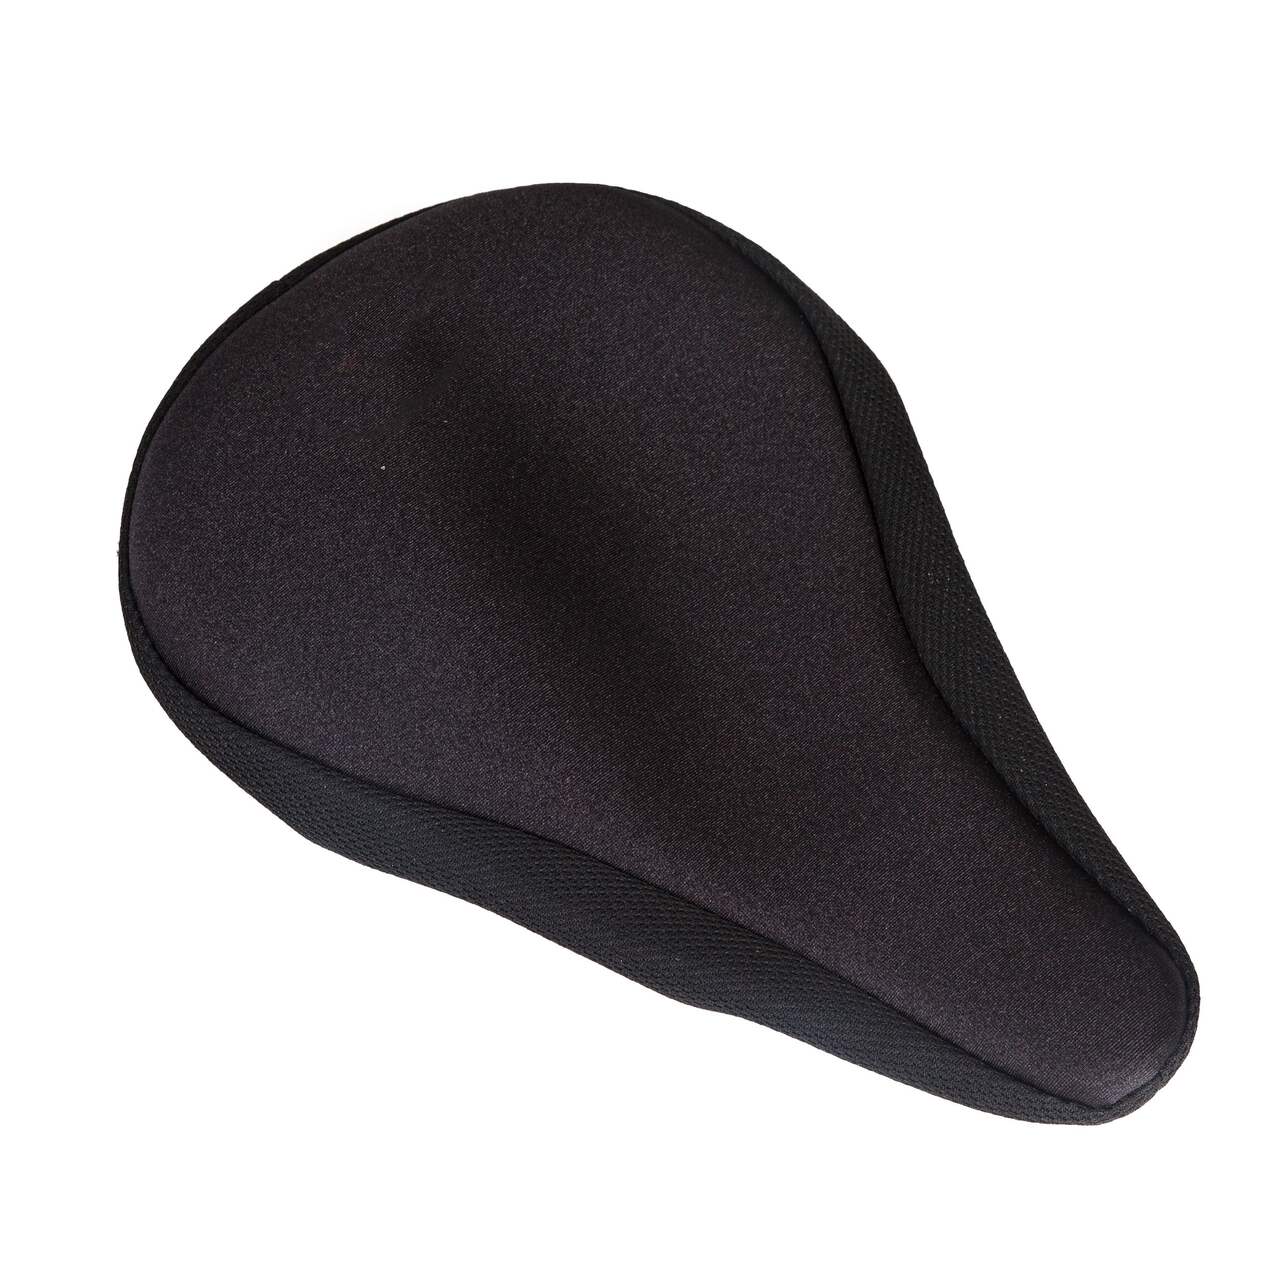 https://media-www.canadiantire.ca/product/playing/cycling/bicycle-accessories/0730380/supercycle-seat-cover-491865f4-f2c8-4fbd-a4f3-f2edb2841234-jpgrendition.jpg?imdensity=1&imwidth=640&impolicy=mZoom